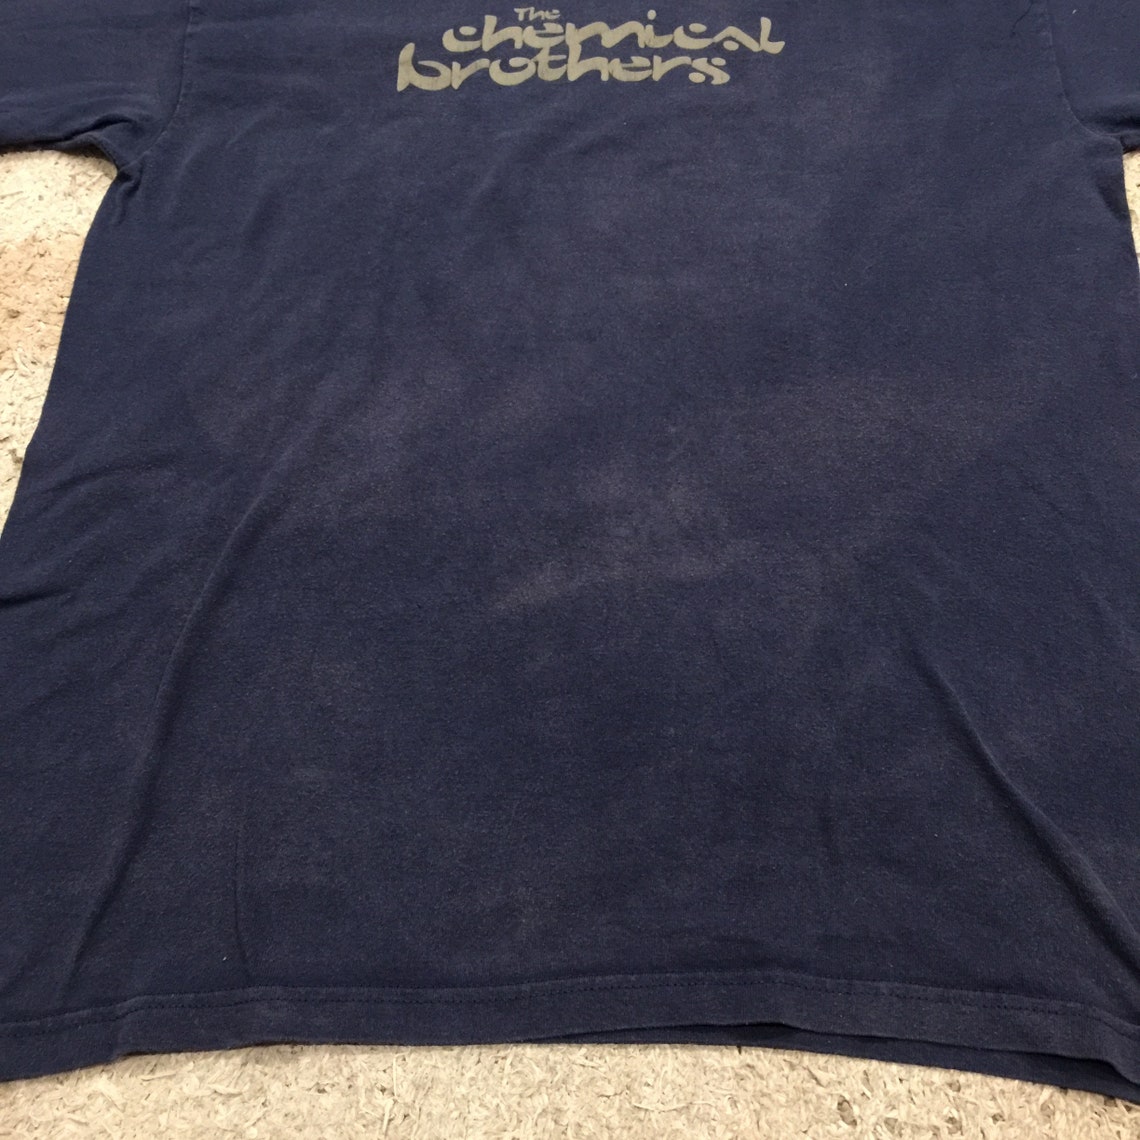 Vintage 1990s The Chemical Brothers T-Shirt | Etsy